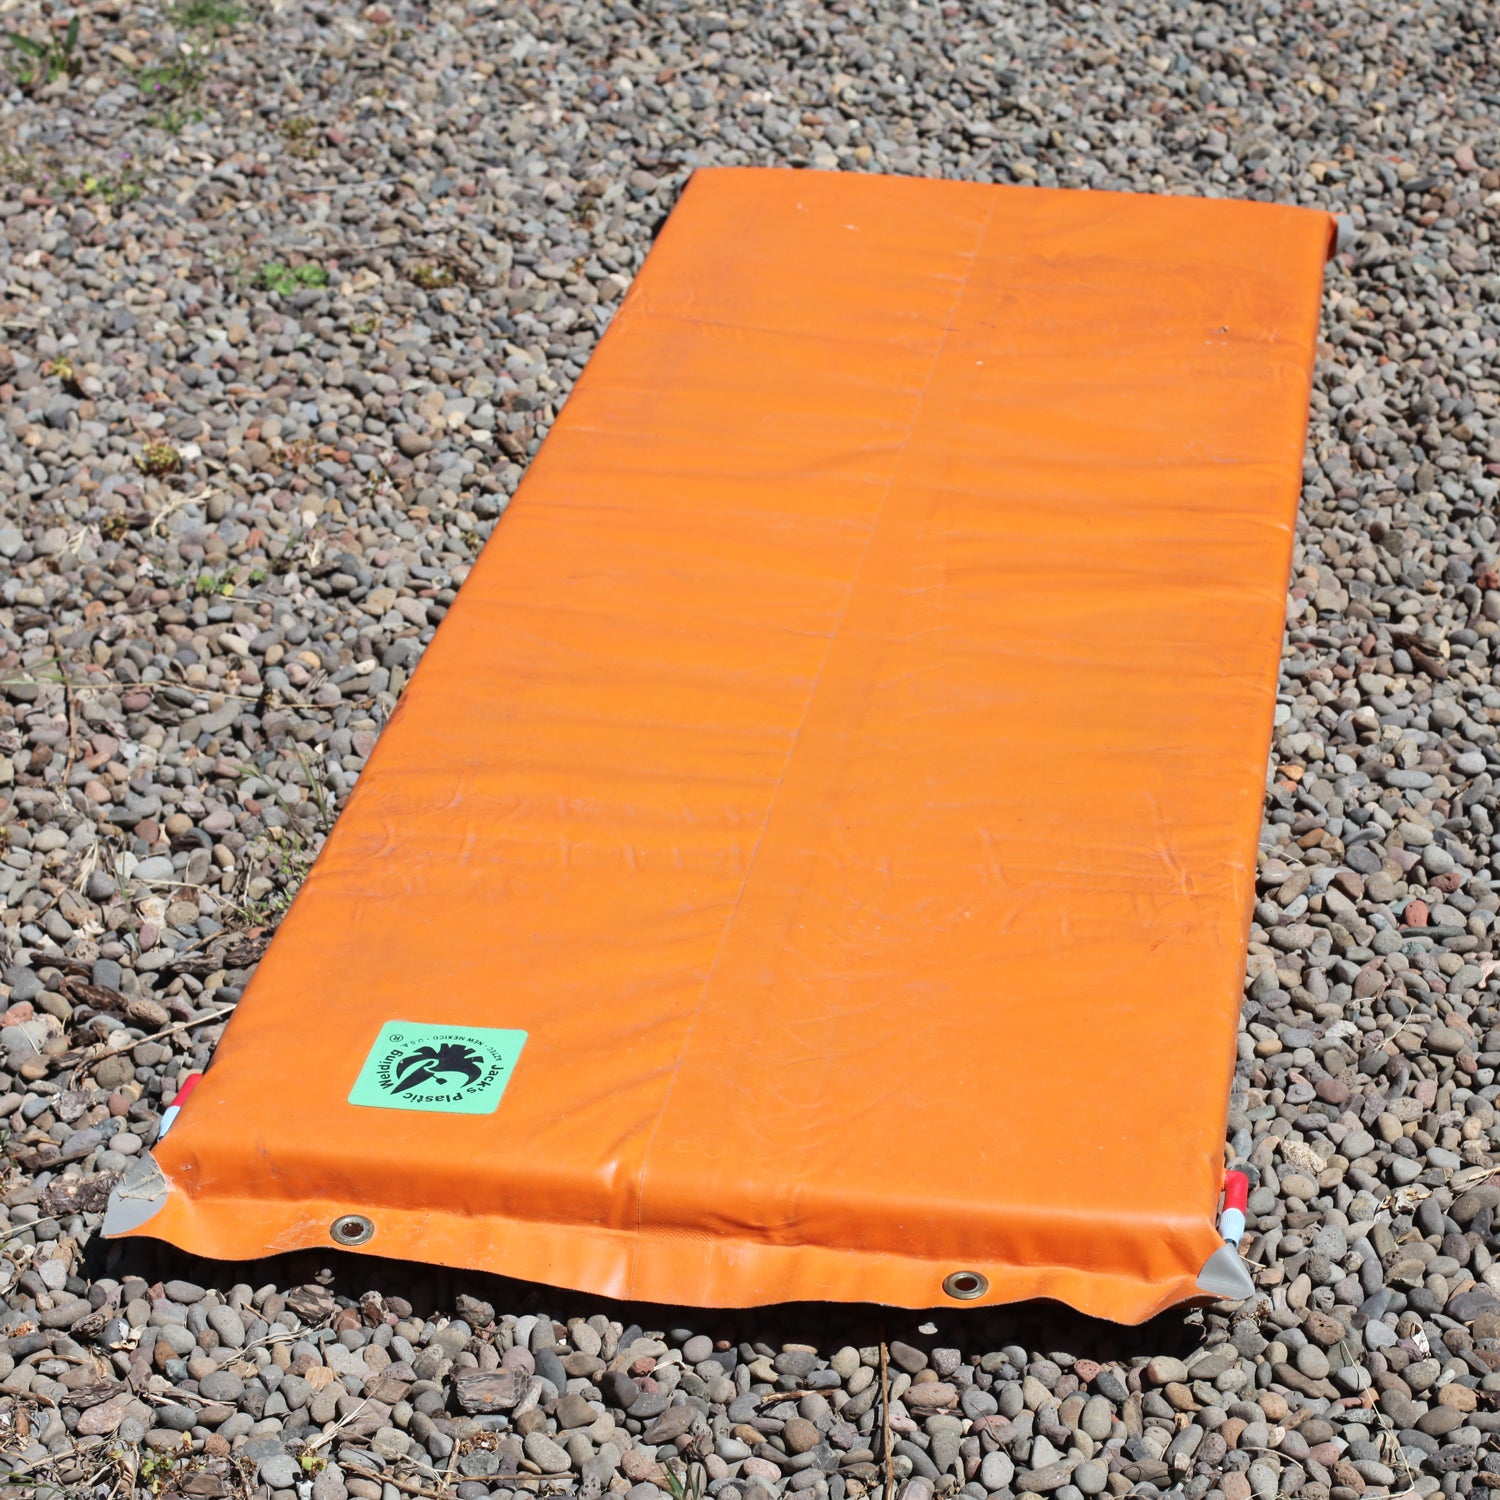 The Best Sleeping Pad Ever Made